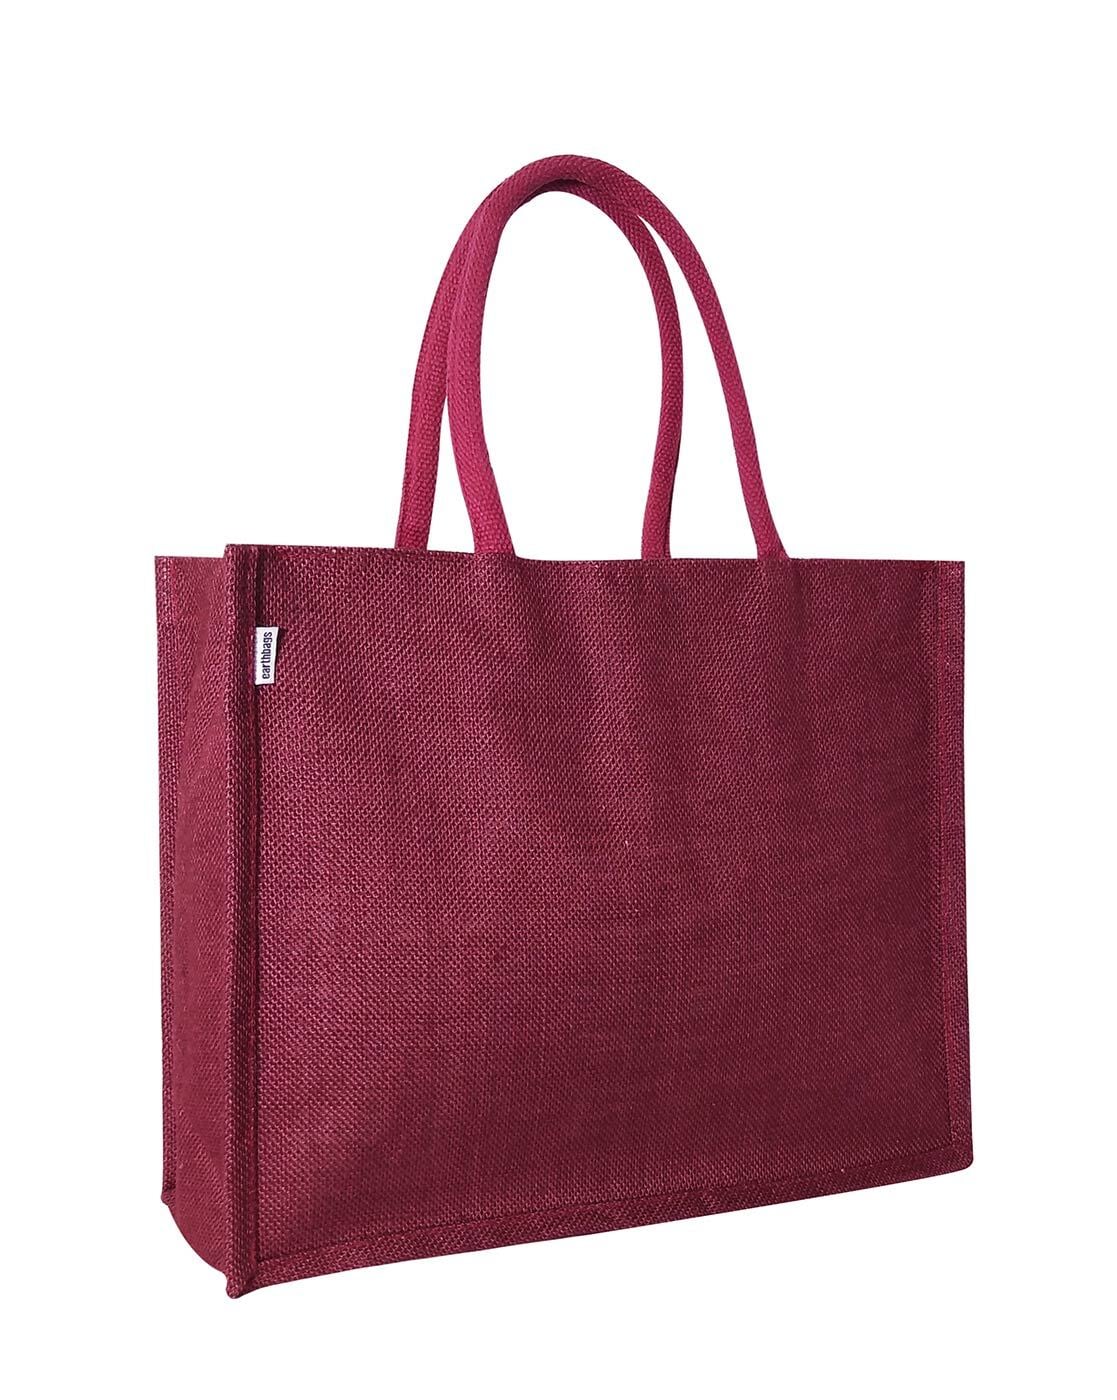 Cotton Bags In Pune, Maharashtra At Best Price | Cotton Bags Manufacturers,  Suppliers In Poona